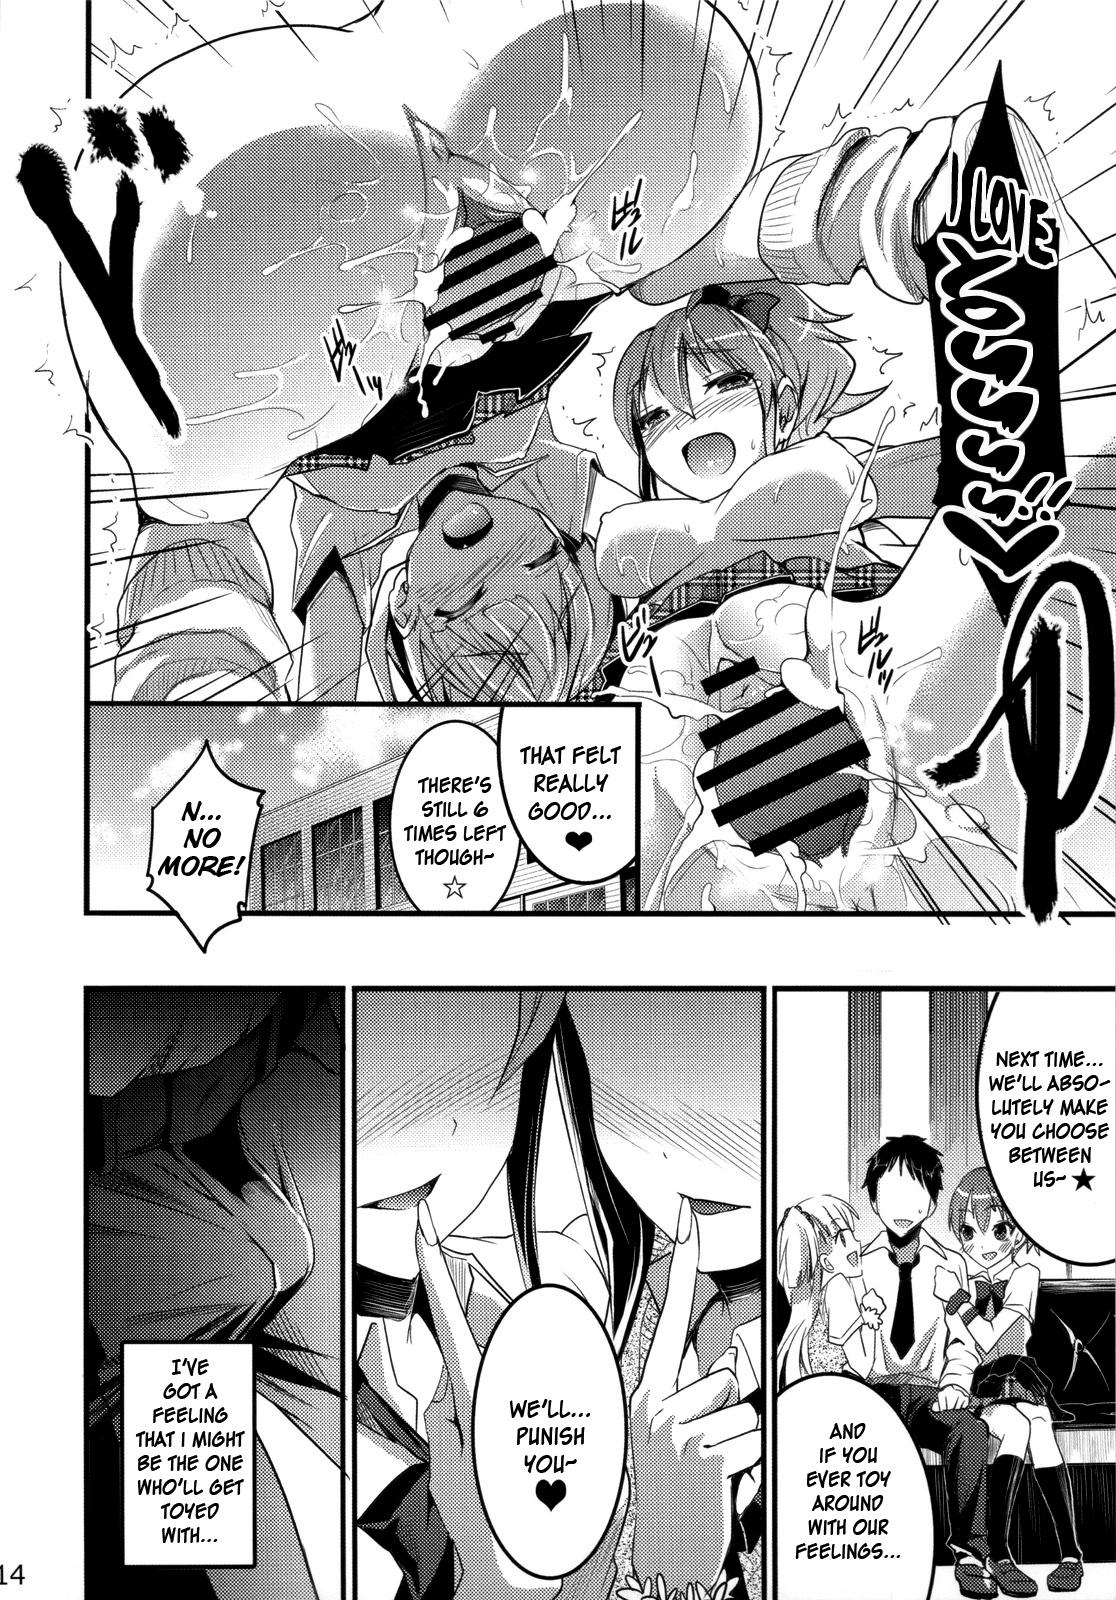 The Jougasaki Sisters' All-out Love Attack + Omake 13